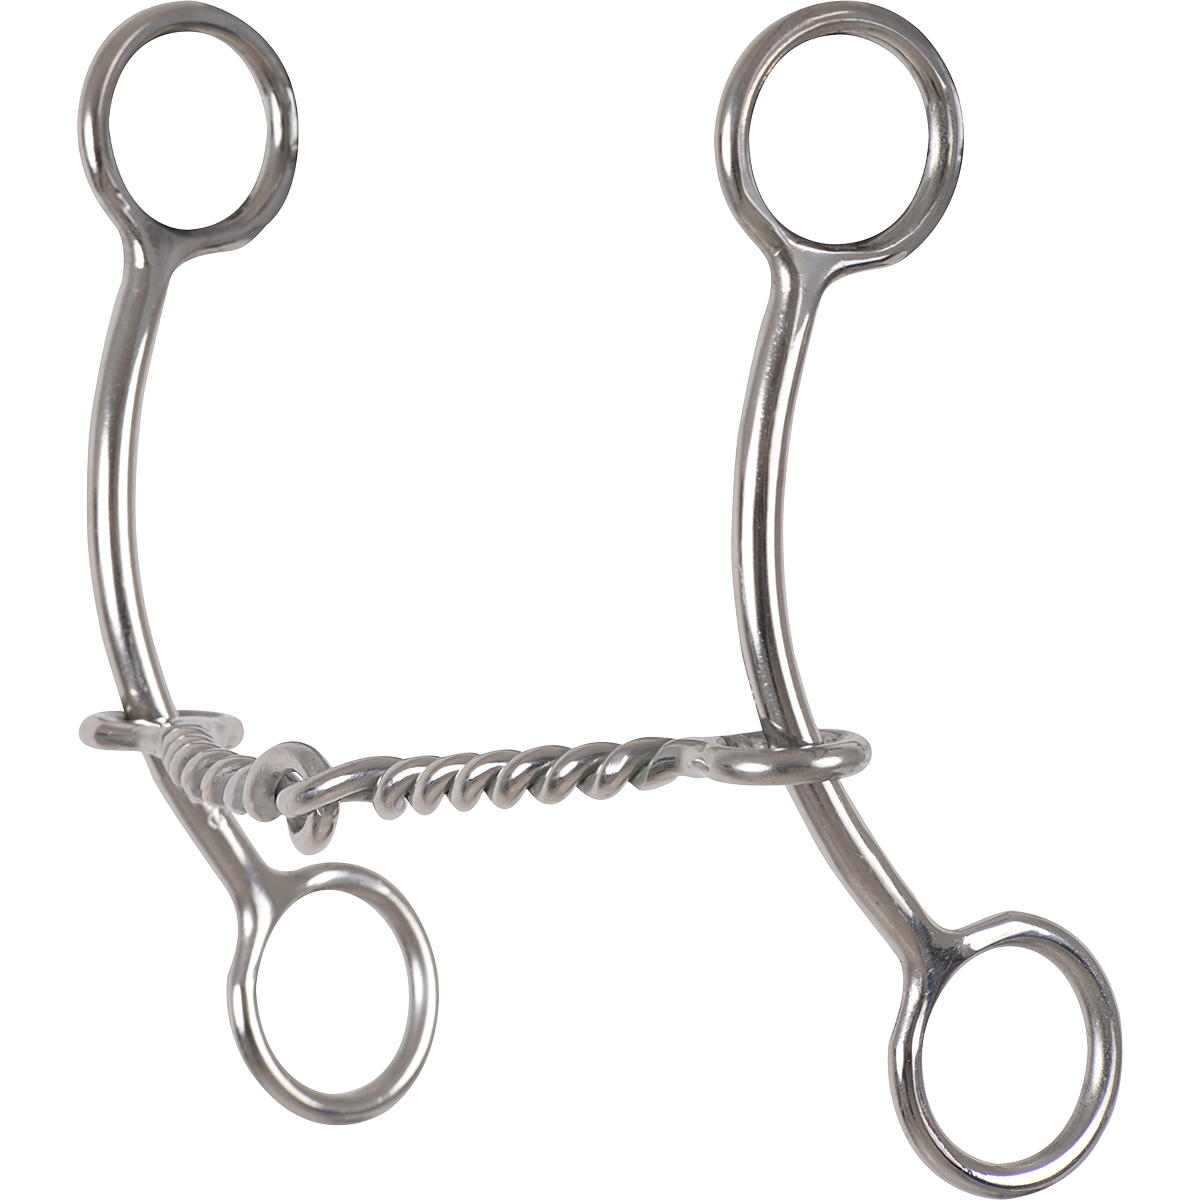 Goosetree Simplicity Bit - Twisted Wire Snaffle